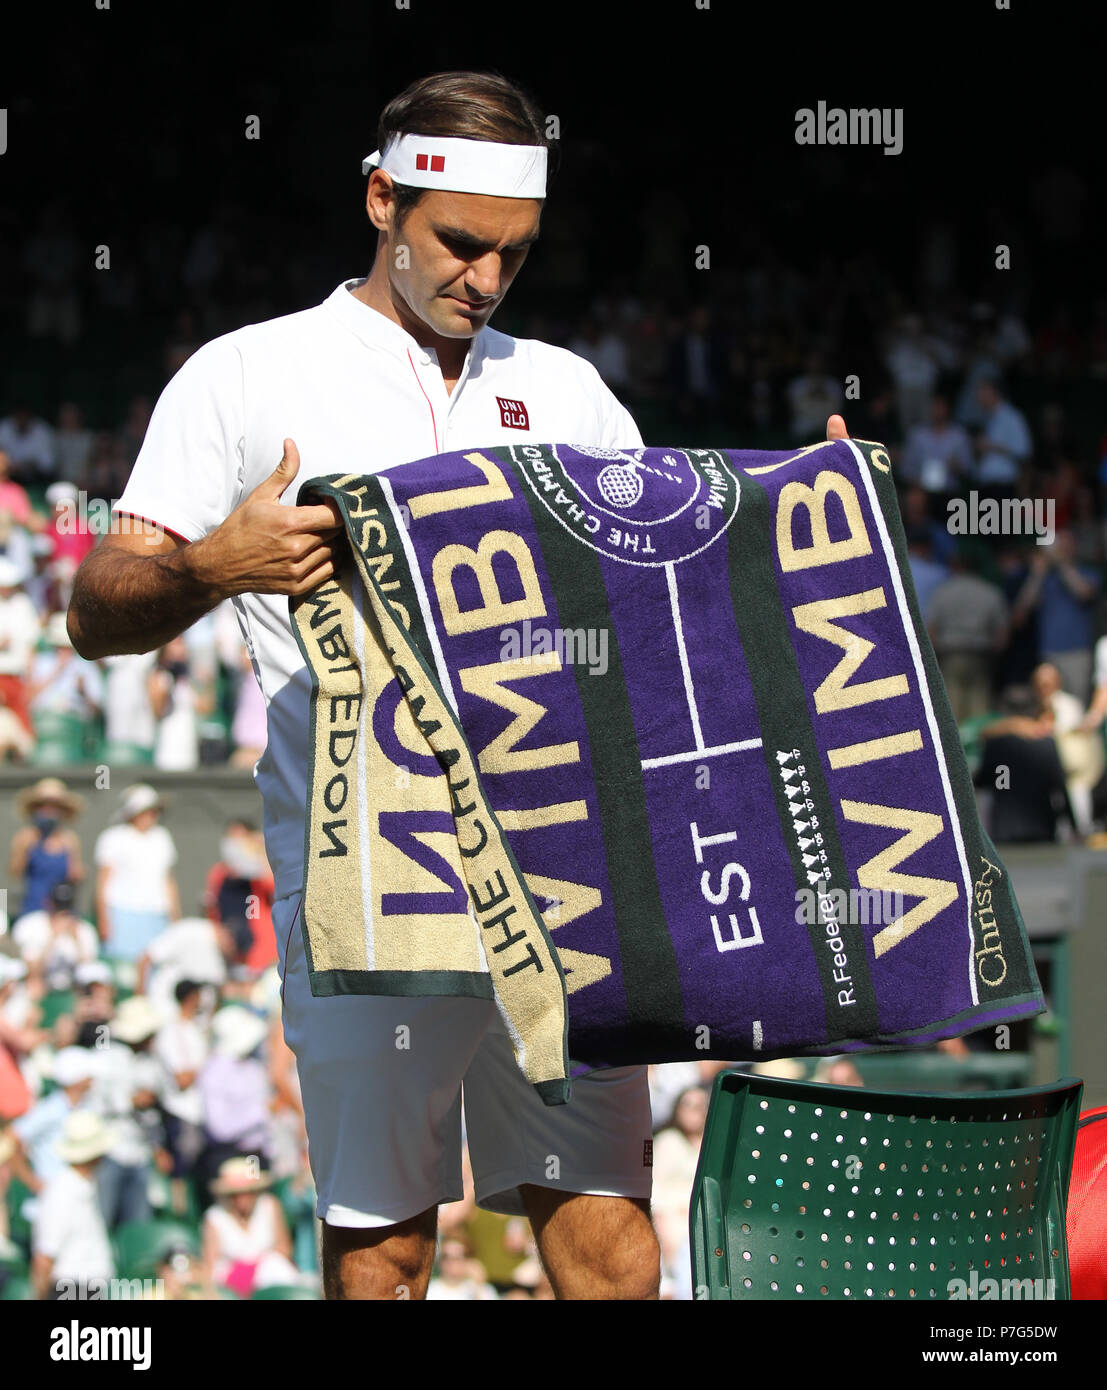 ROGER FEDERER, LIMITED EDITION HANDTUCH, die Wimbledon Championships 2018, die Wimbledon Championships 2018 DIE ALL ENGLAND TENNIS CLUB, 2018 Stockfoto